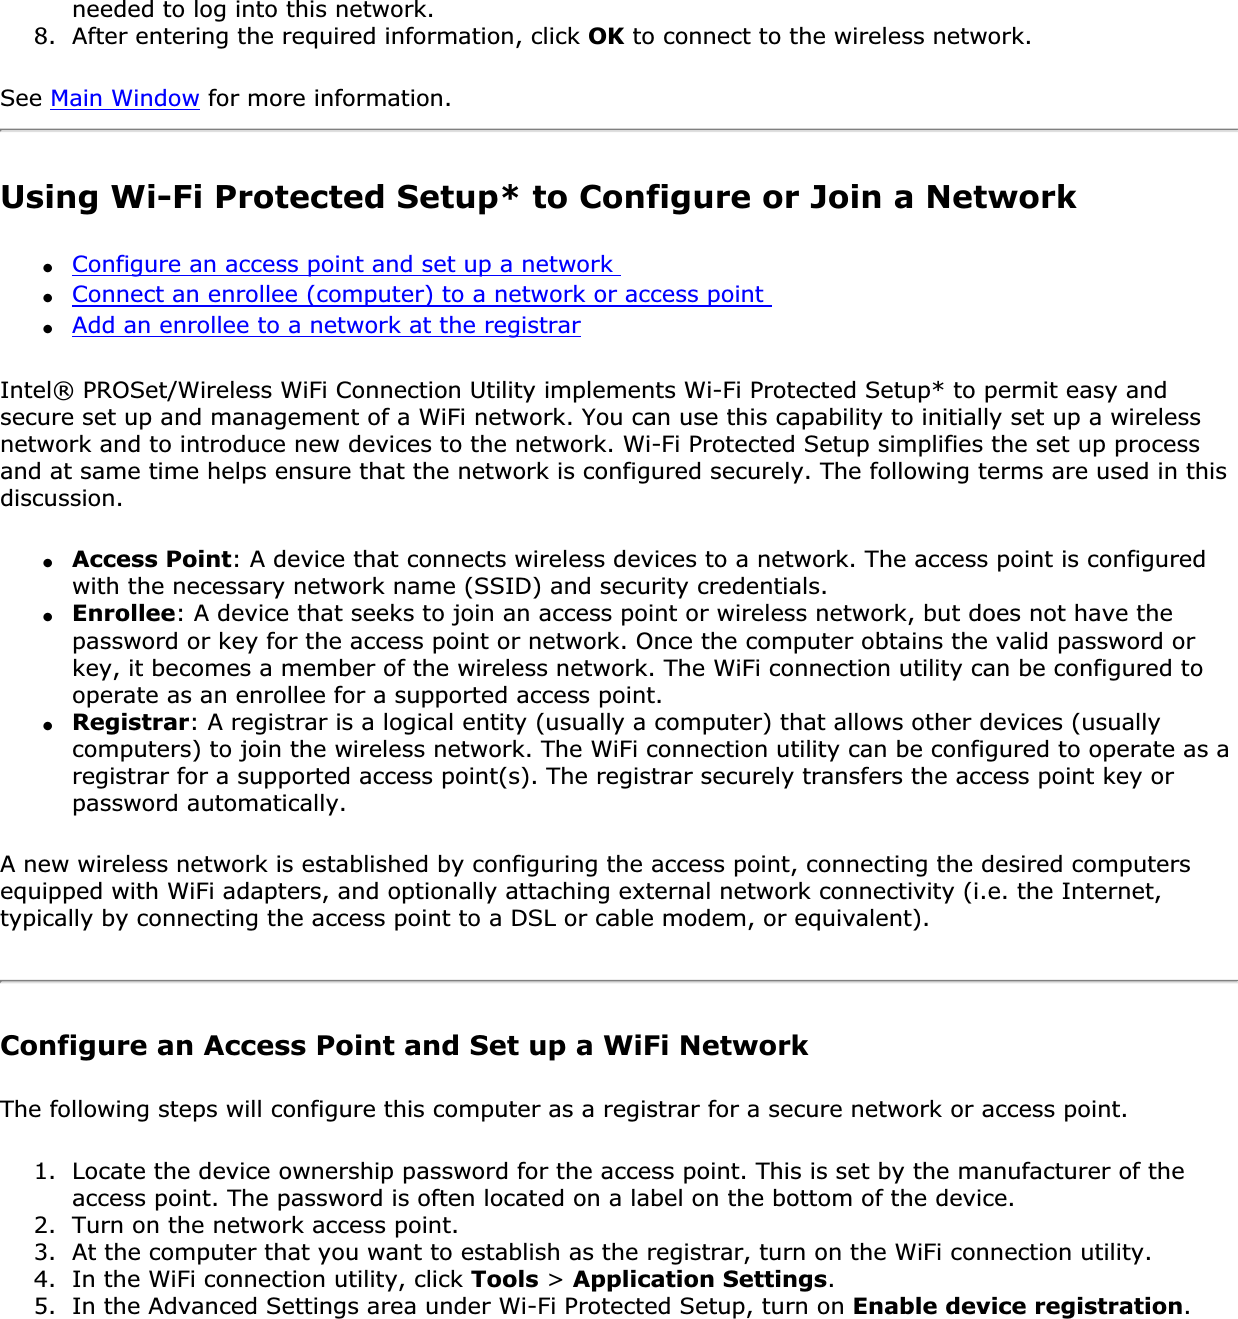 needed to log into this network.8. After entering the required information, click OK to connect to the wireless network.See Main Window for more information. Using Wi-Fi Protected Setup* to Configure or Join a Network ●Configure an access point and set up a network ●Connect an enrollee (computer) to a network or access point ●Add an enrollee to a network at the registrarIntel® PROSet/Wireless WiFi Connection Utility implements Wi-Fi Protected Setup* to permit easy and secure set up and management of a WiFi network. You can use this capability to initially set up a wireless network and to introduce new devices to the network. Wi-Fi Protected Setup simplifies the set up process and at same time helps ensure that the network is configured securely. The following terms are used in this discussion.●Access Point: A device that connects wireless devices to a network. The access point is configured with the necessary network name (SSID) and security credentials.●Enrollee: A device that seeks to join an access point or wireless network, but does not have the password or key for the access point or network. Once the computer obtains the valid password or key, it becomes a member of the wireless network. The WiFi connection utility can be configured to operate as an enrollee for a supported access point.●Registrar: A registrar is a logical entity (usually a computer) that allows other devices (usually computers) to join the wireless network. The WiFi connection utility can be configured to operate as a registrar for a supported access point(s). The registrar securely transfers the access point key or password automatically.A new wireless network is established by configuring the access point, connecting the desired computers equipped with WiFi adapters, and optionally attaching external network connectivity (i.e. the Internet, typically by connecting the access point to a DSL or cable modem, or equivalent).Configure an Access Point and Set up a WiFi NetworkThe following steps will configure this computer as a registrar for a secure network or access point.1. Locate the device ownership password for the access point. This is set by the manufacturer of the access point. The password is often located on a label on the bottom of the device.2. Turn on the network access point.3. At the computer that you want to establish as the registrar, turn on the WiFi connection utility.4. In the WiFi connection utility, click Tools &gt; Application Settings.5. In the Advanced Settings area under Wi-Fi Protected Setup, turn on Enable device registration.